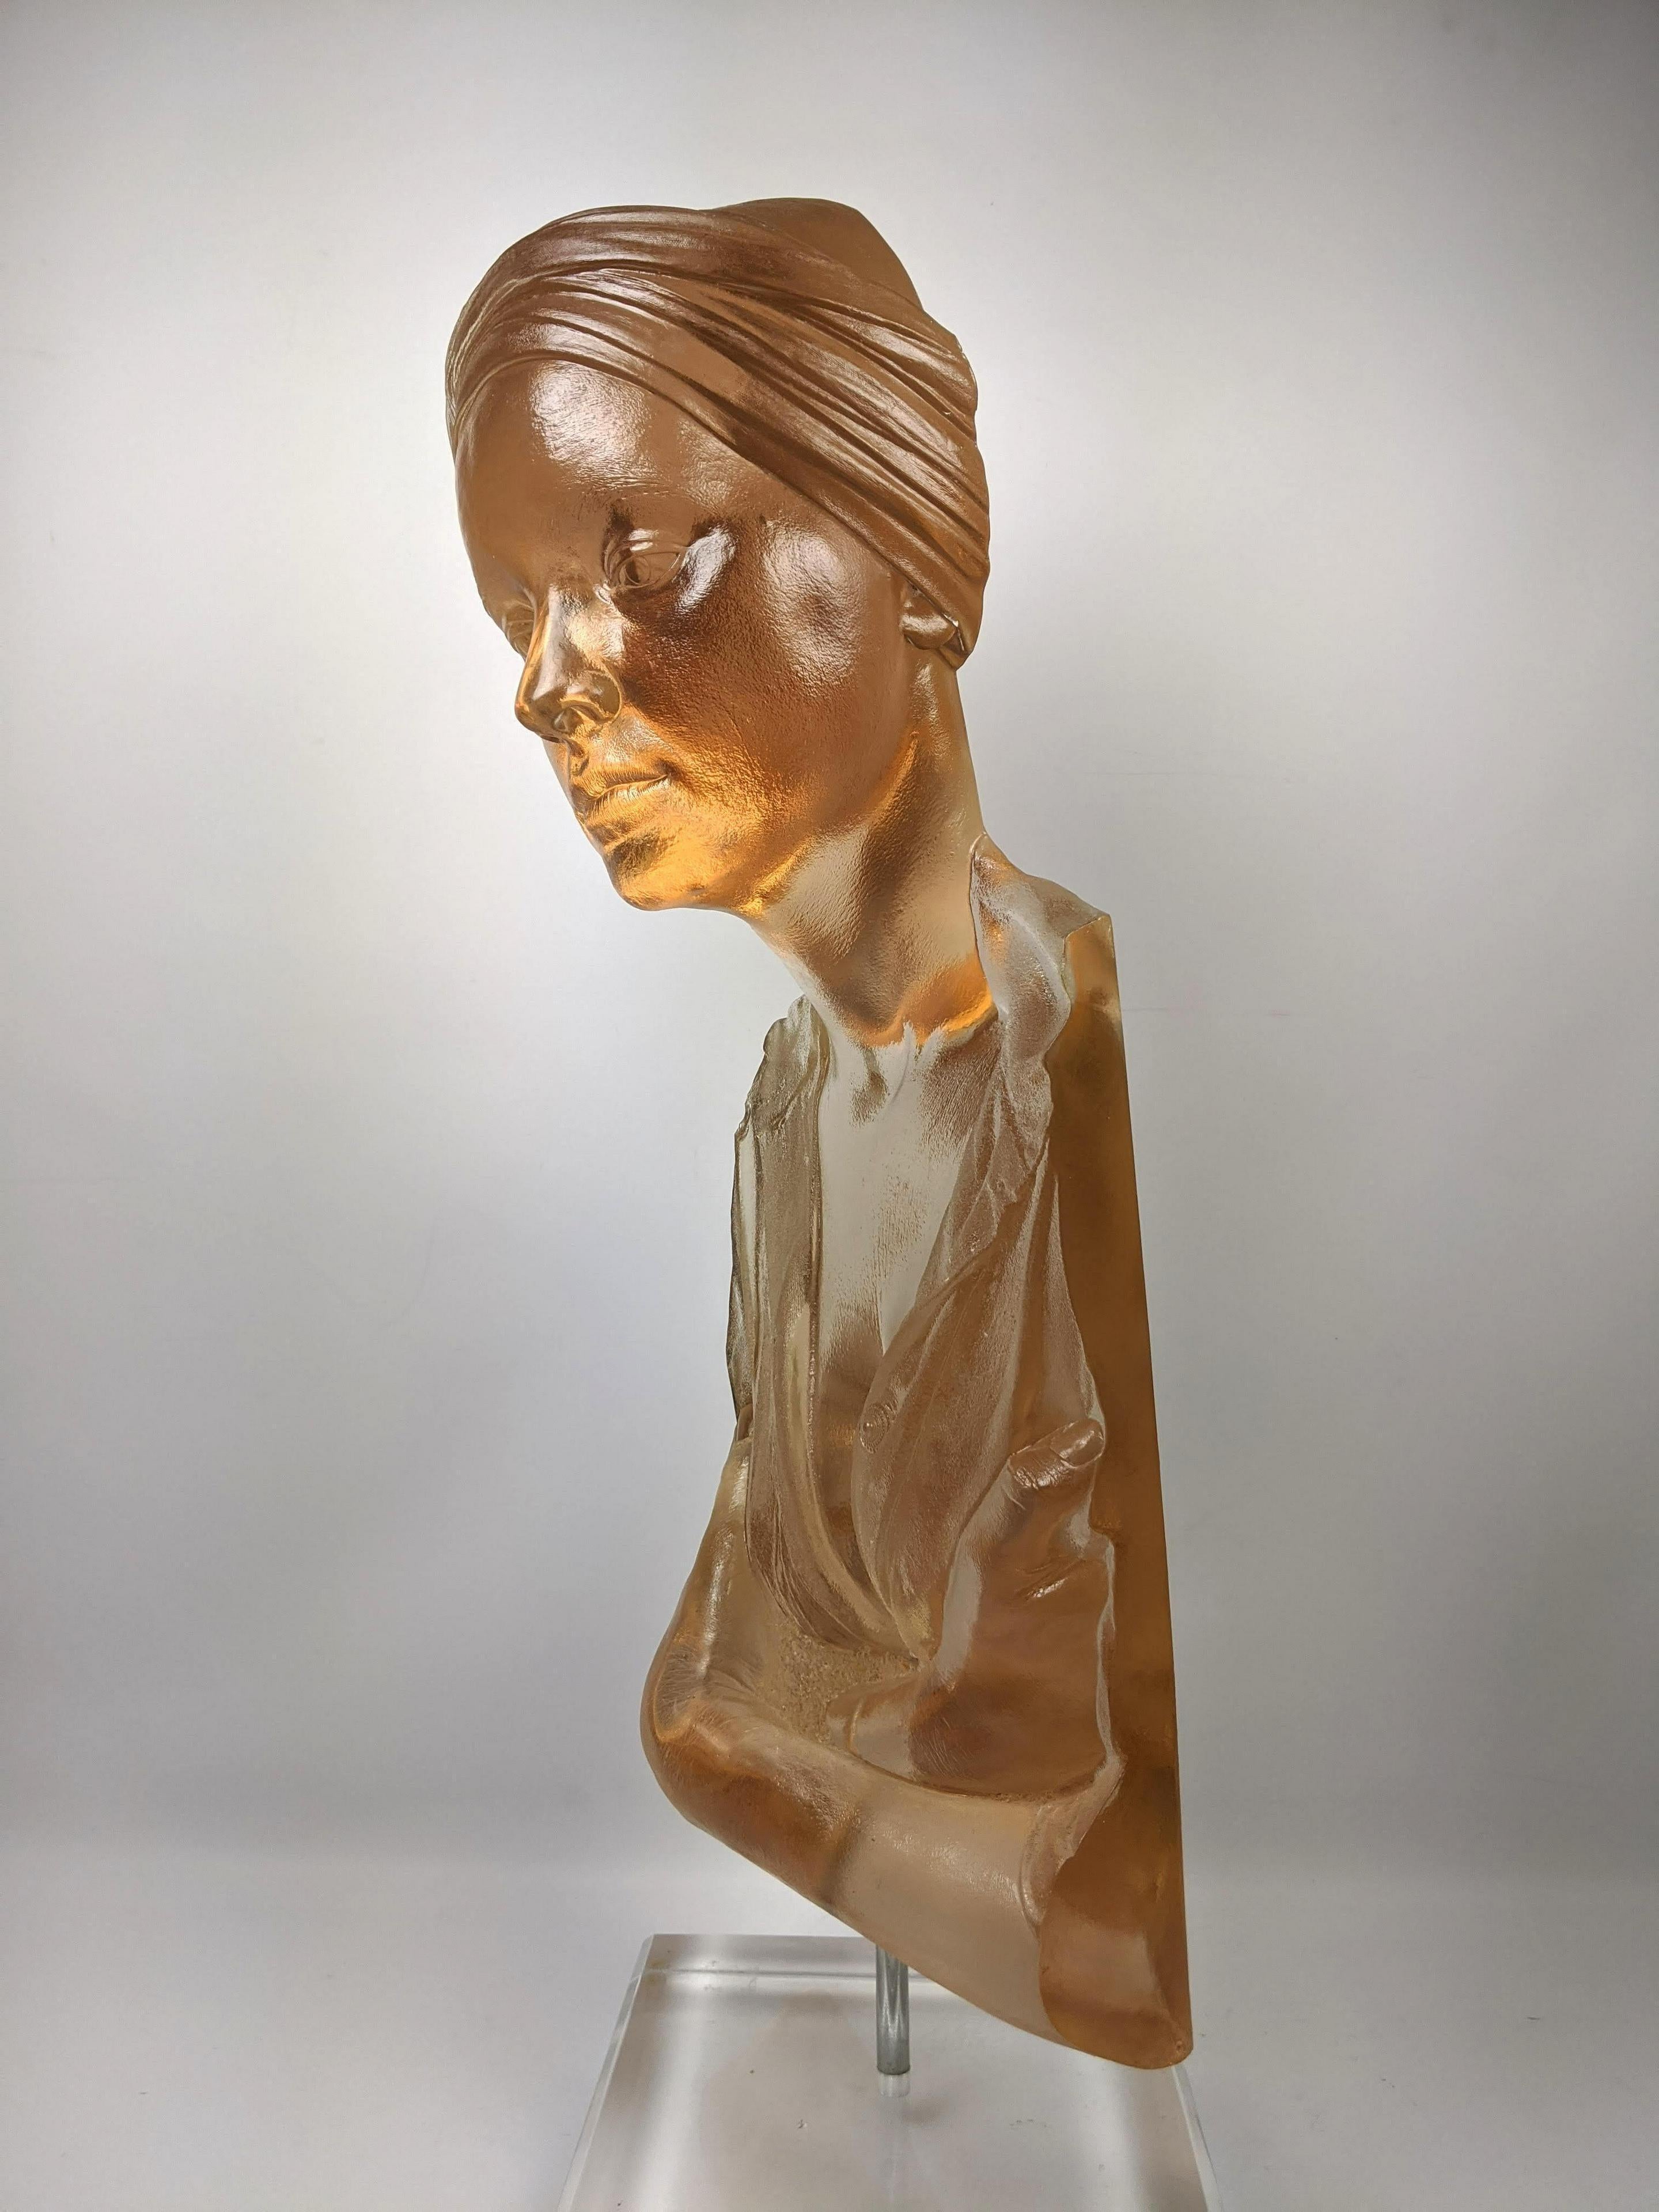 A cast acrylic sculpture titled Chin Up by American artist Marc Sijan. This sculpture is made from acrylic and portrays the upper torso of a clothed woman wearing a bandana over her free-flowing hair. Her eyes are closed and her head is tilted up as